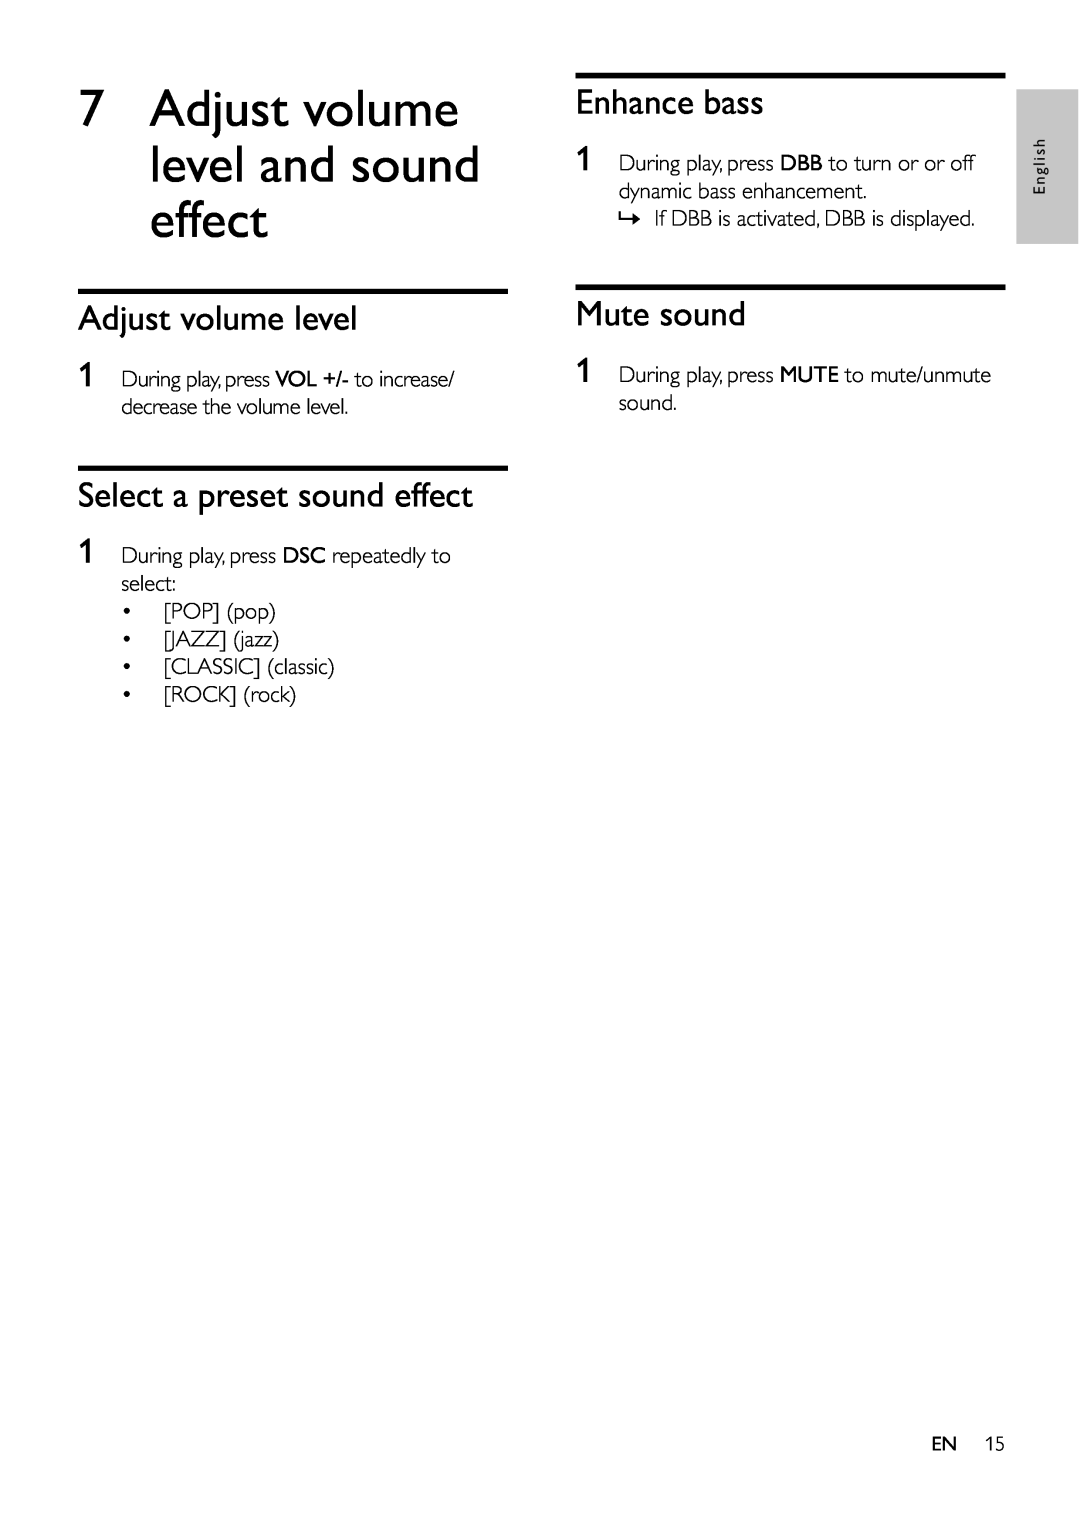 Philips MCM166 user manual 7Adjust volume level and sound effect, Select a preset sound effect, Enhance bass, Mute sound 